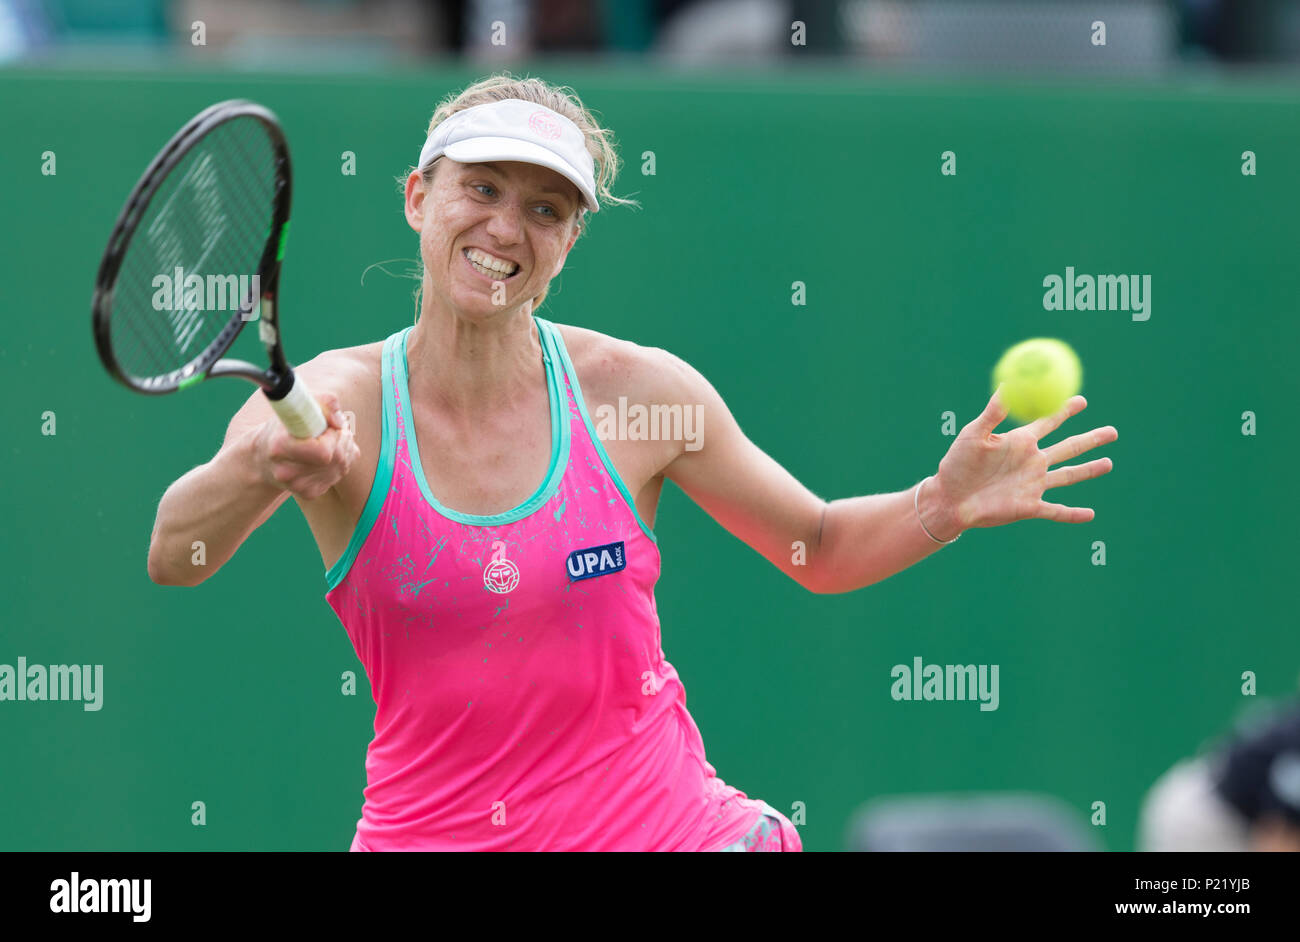 Mona Barthel in action against Magdalena Rybarikova in the Nature Valley Open second round match at Nottingham Tennis Centre, Nottingham. Picture date Stock Photo